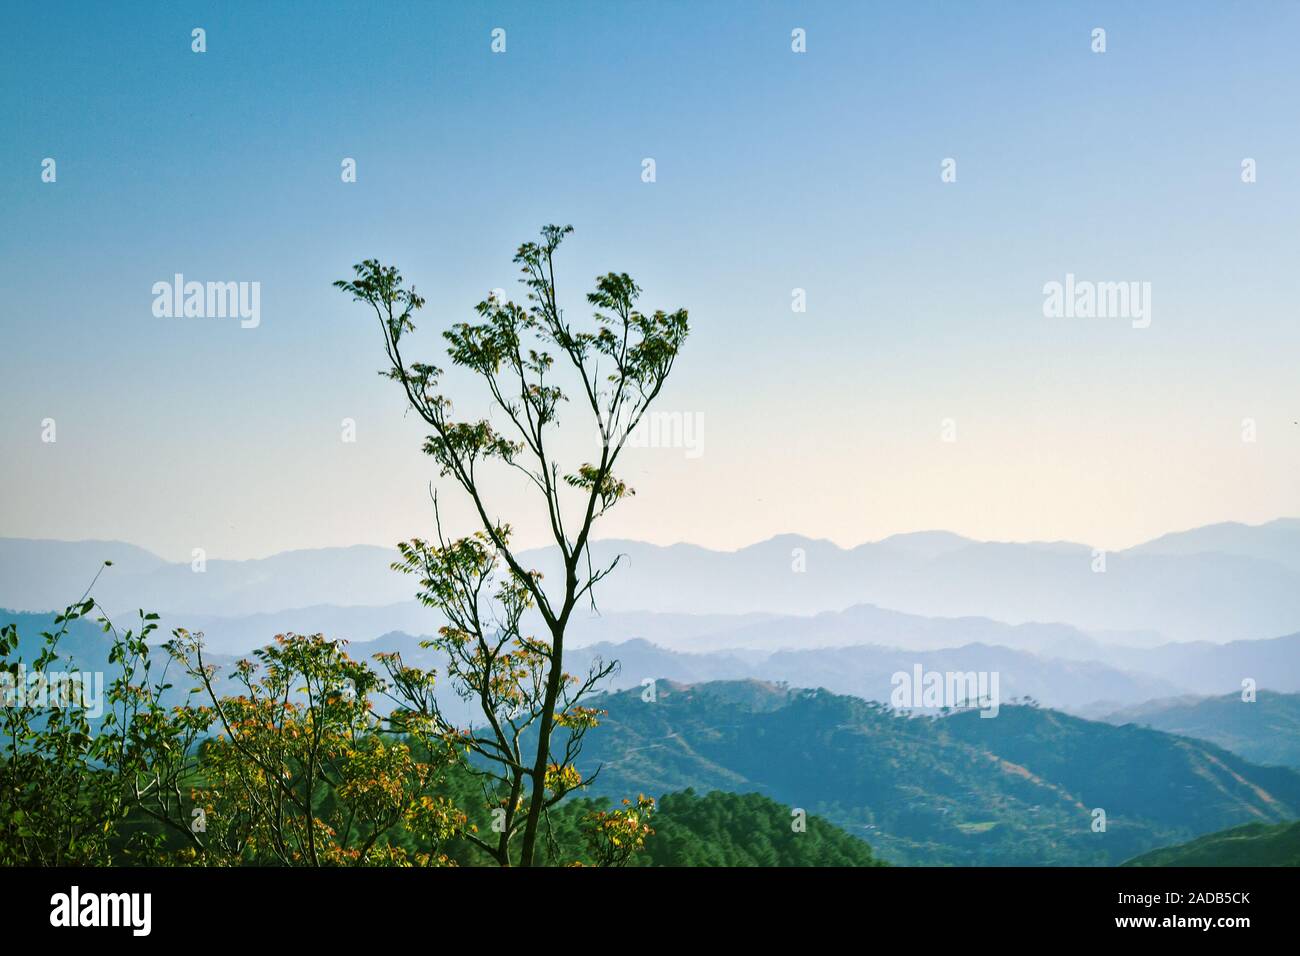 Mountain landscapes of spring time Stock Photo